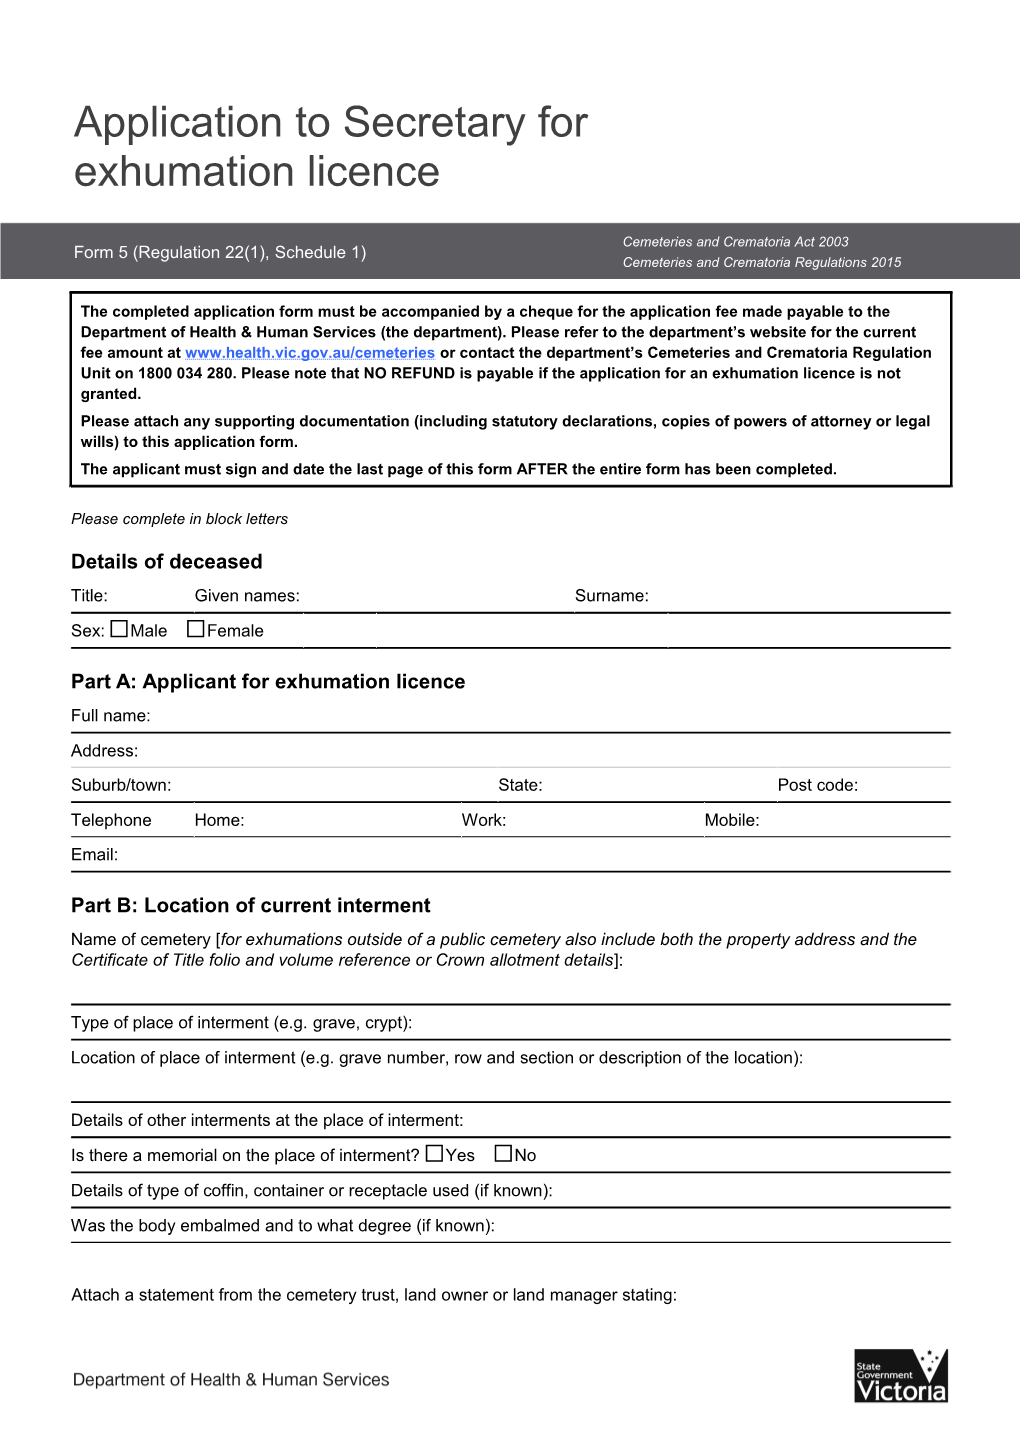 Part A: Applicant for Exhumation Licence